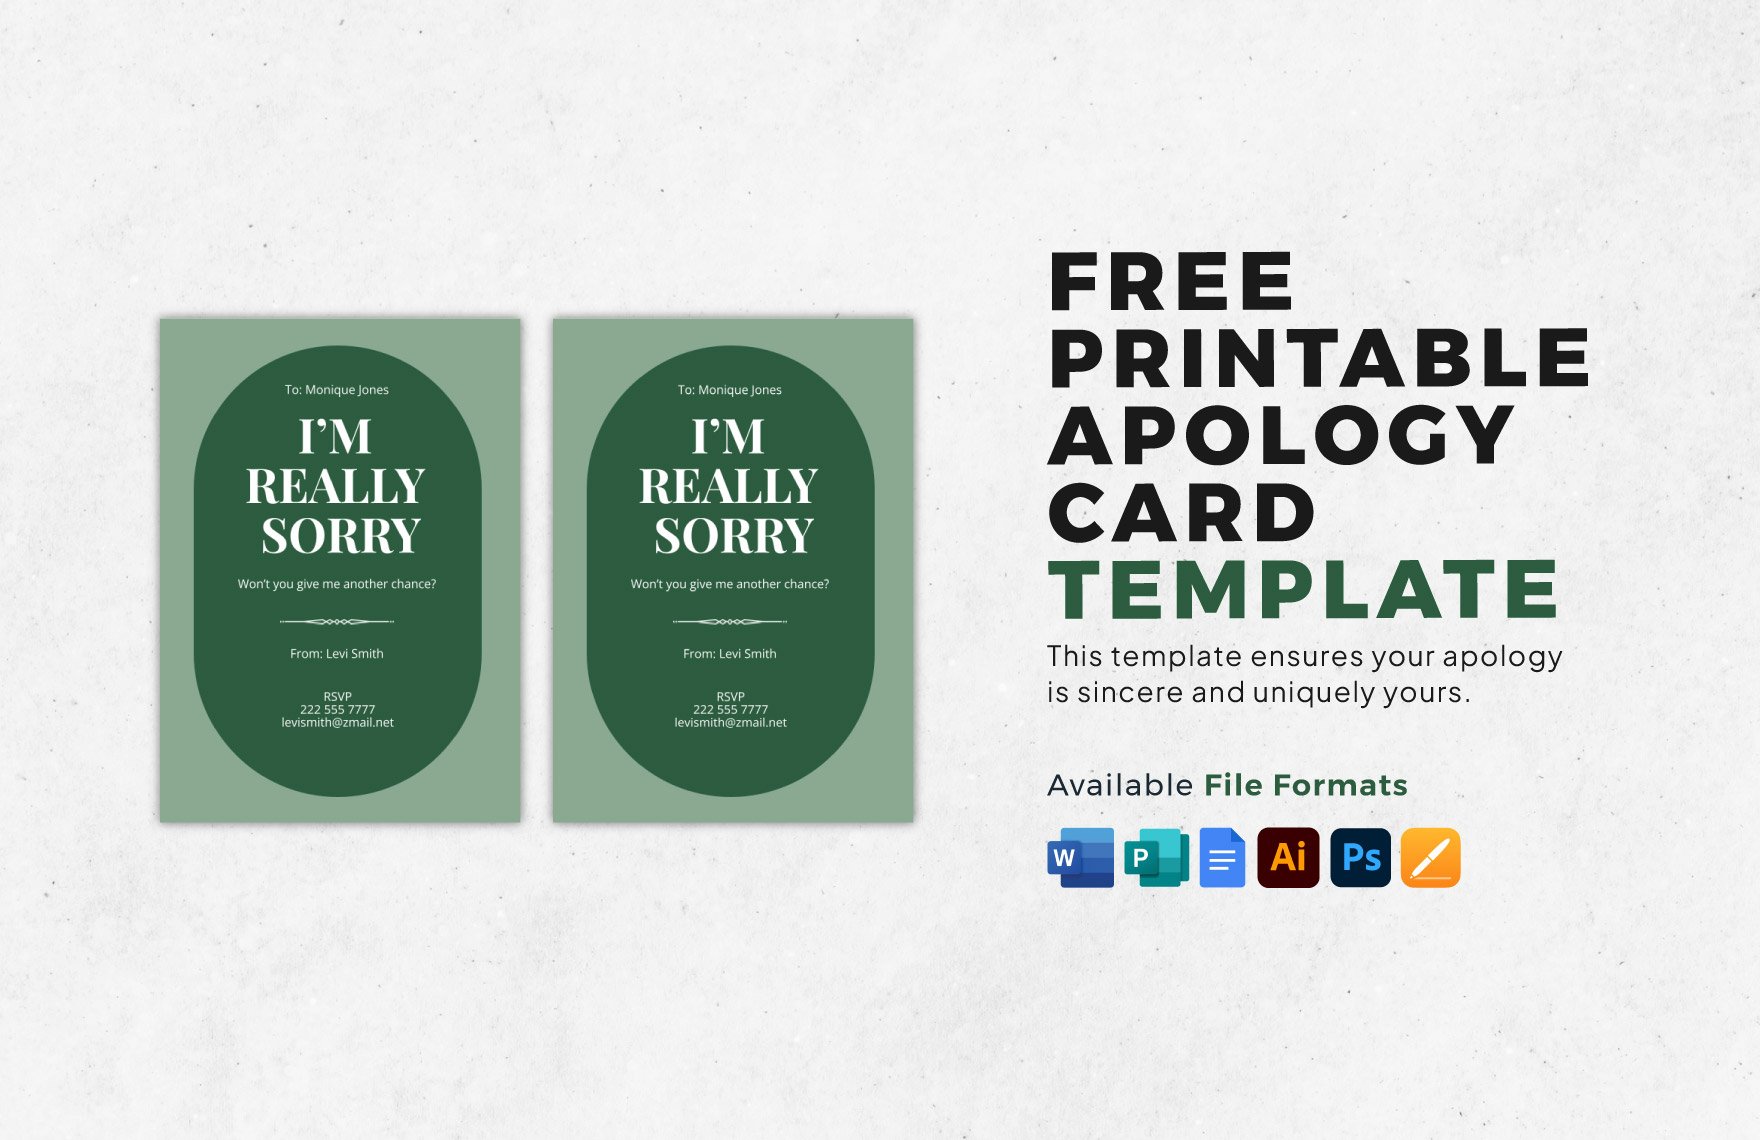 Free Printable Apology Card Template in Word, Google Docs, Illustrator, PSD, Apple Pages, Publisher